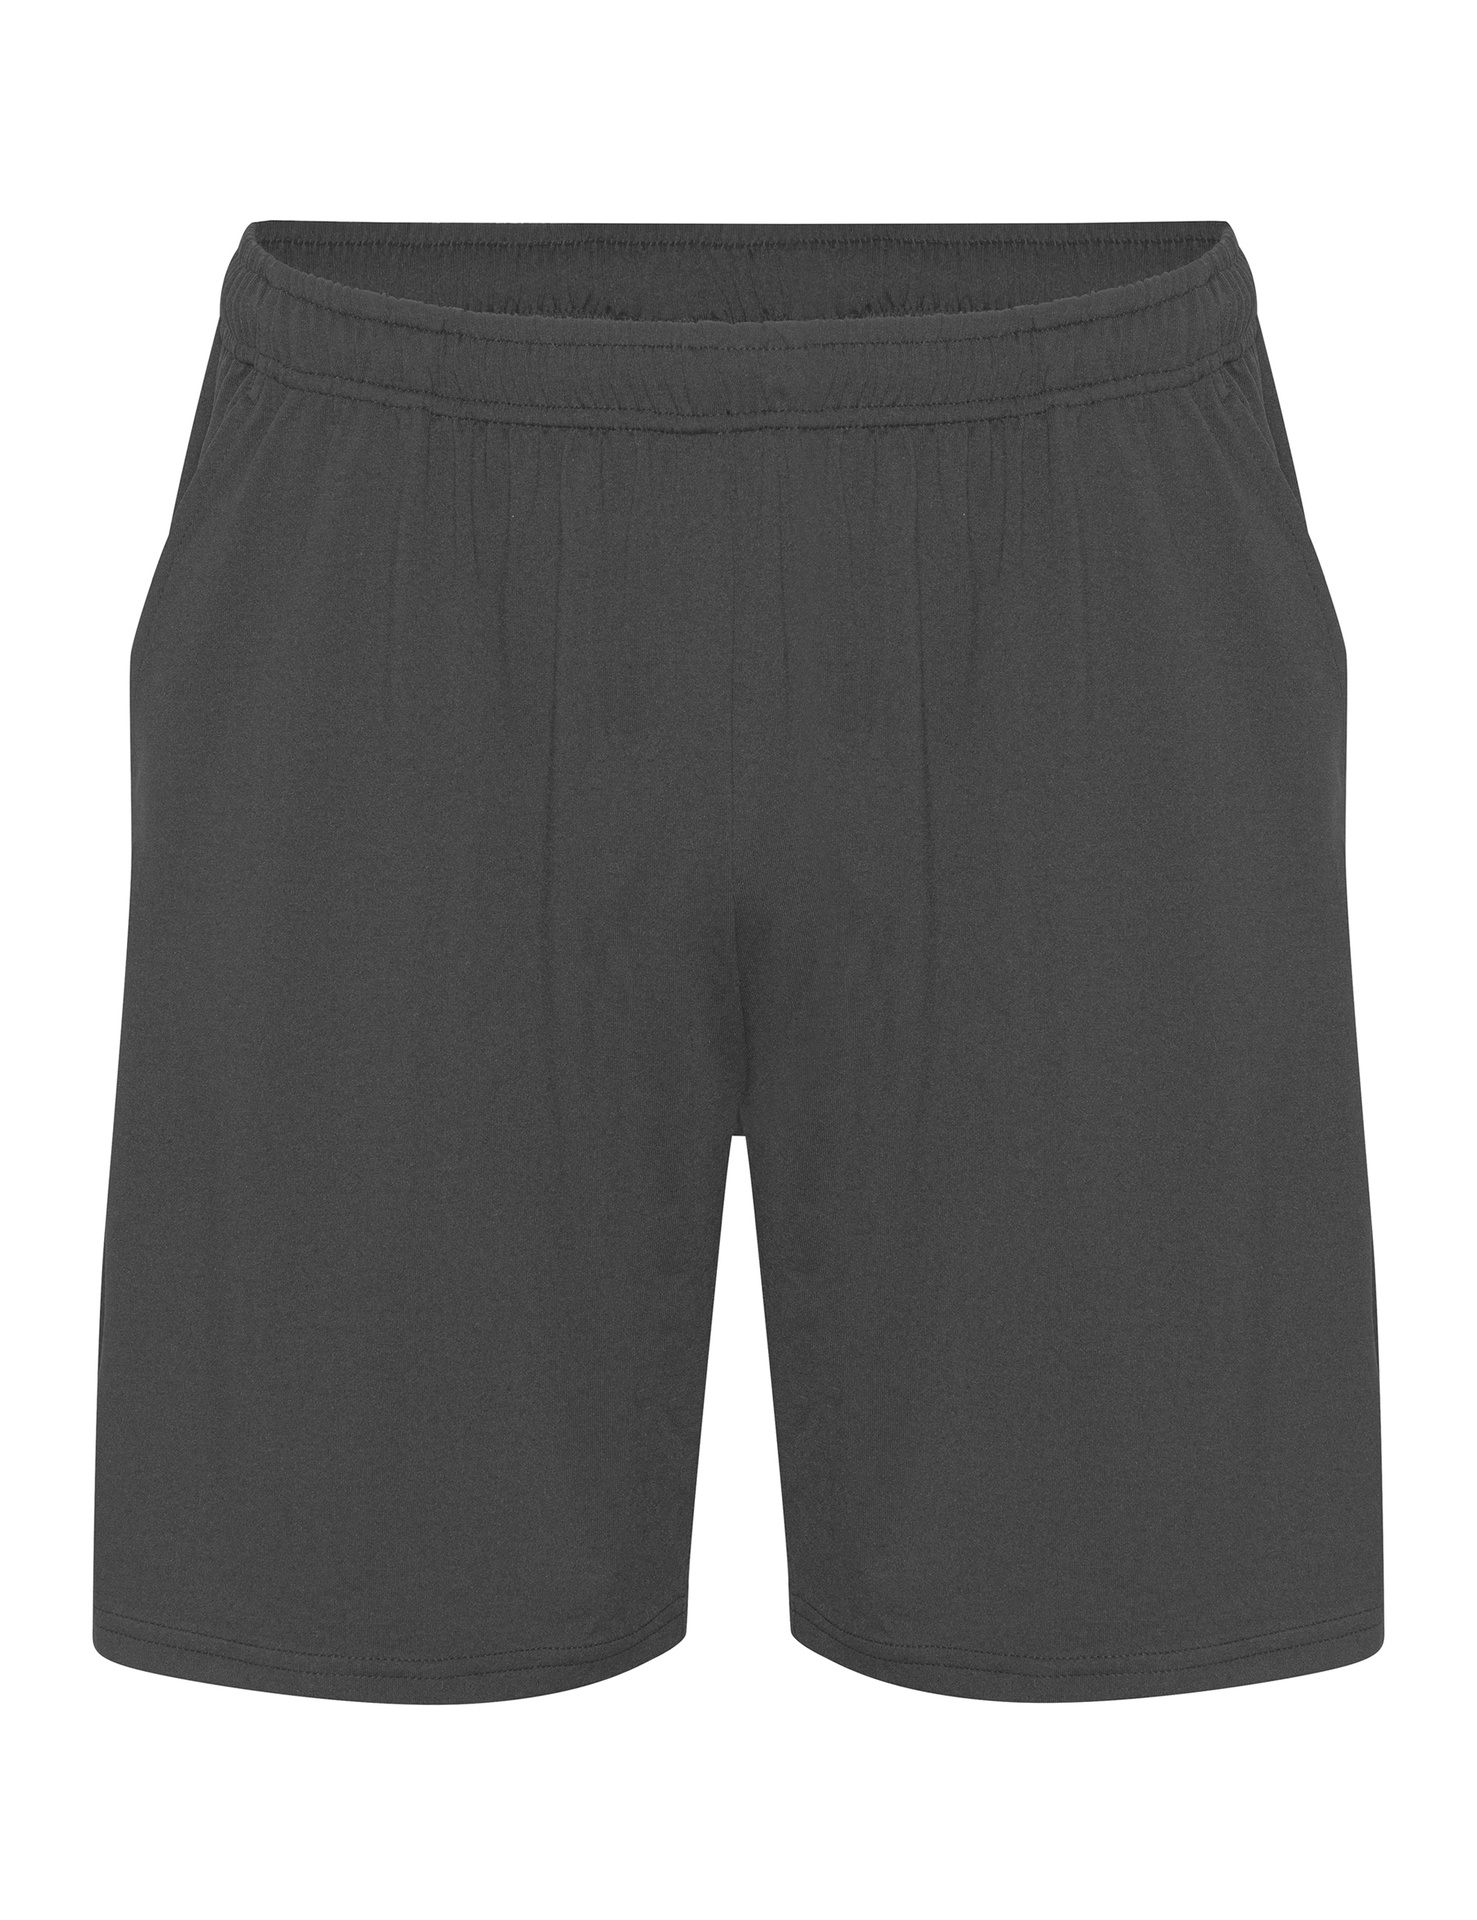 [PR/03872] Unisex Recycled Performance Shorts (Charcoal 06, M)